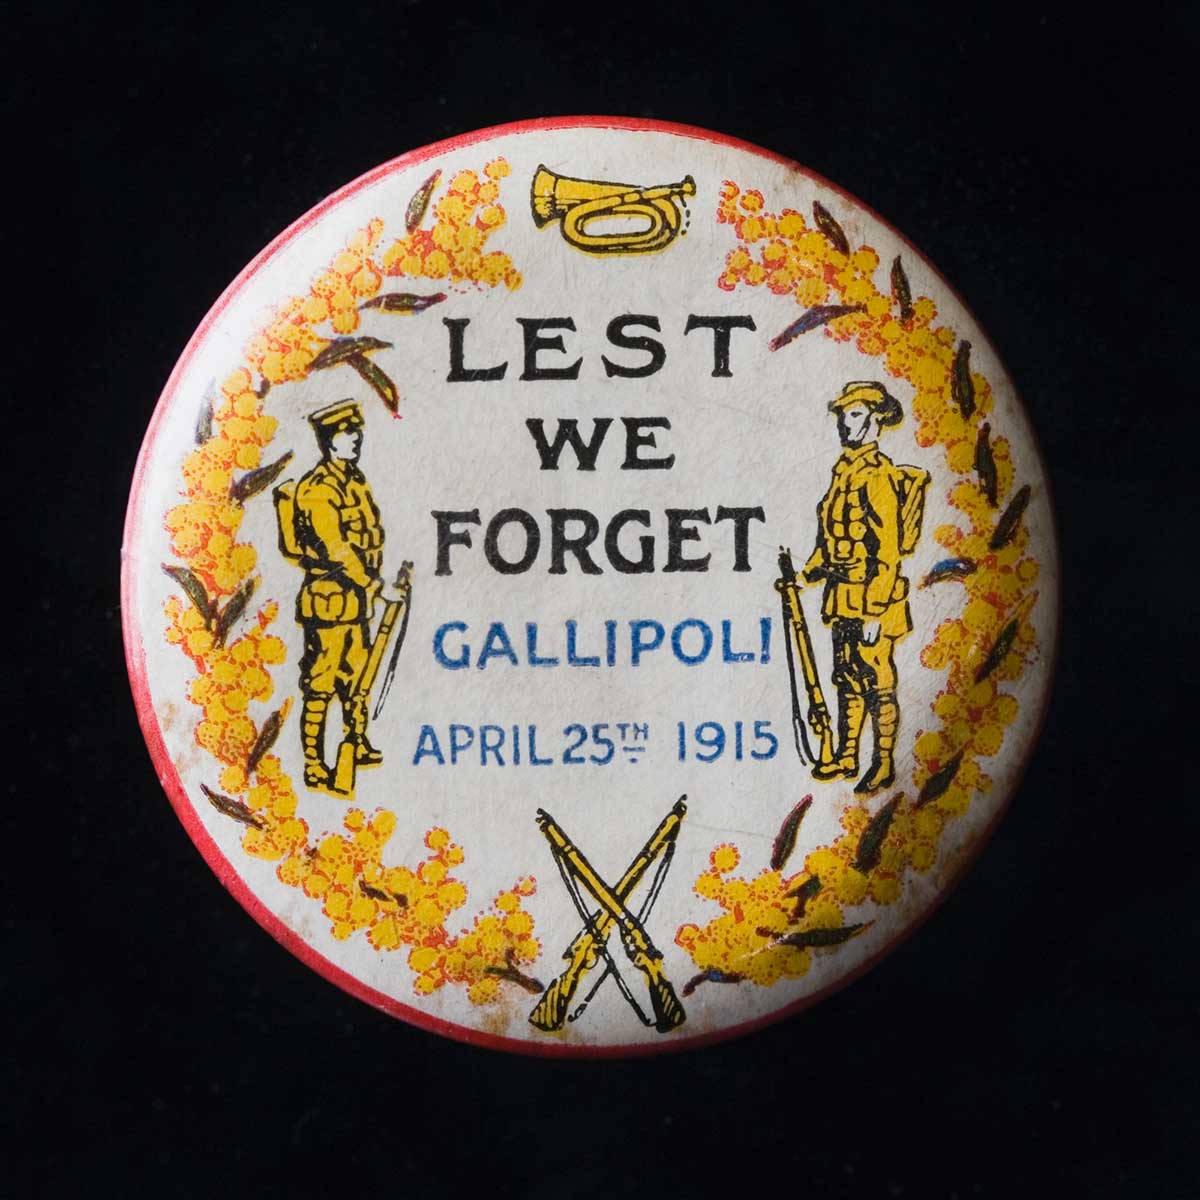 A circular metal Anzac Day badge with a plastic coating, depicting two soldiers in yellow, facing toward the centre, with a bugle at the top and crossed rifles at the bottom. They are set against a cream background with an inner border of yellow wattle blossoms, and a red outer edge. Blue and black text in the centre of the badge reads "LEST / WE / FORGET / GALLIPOLI / APRIL 25TH 1915".